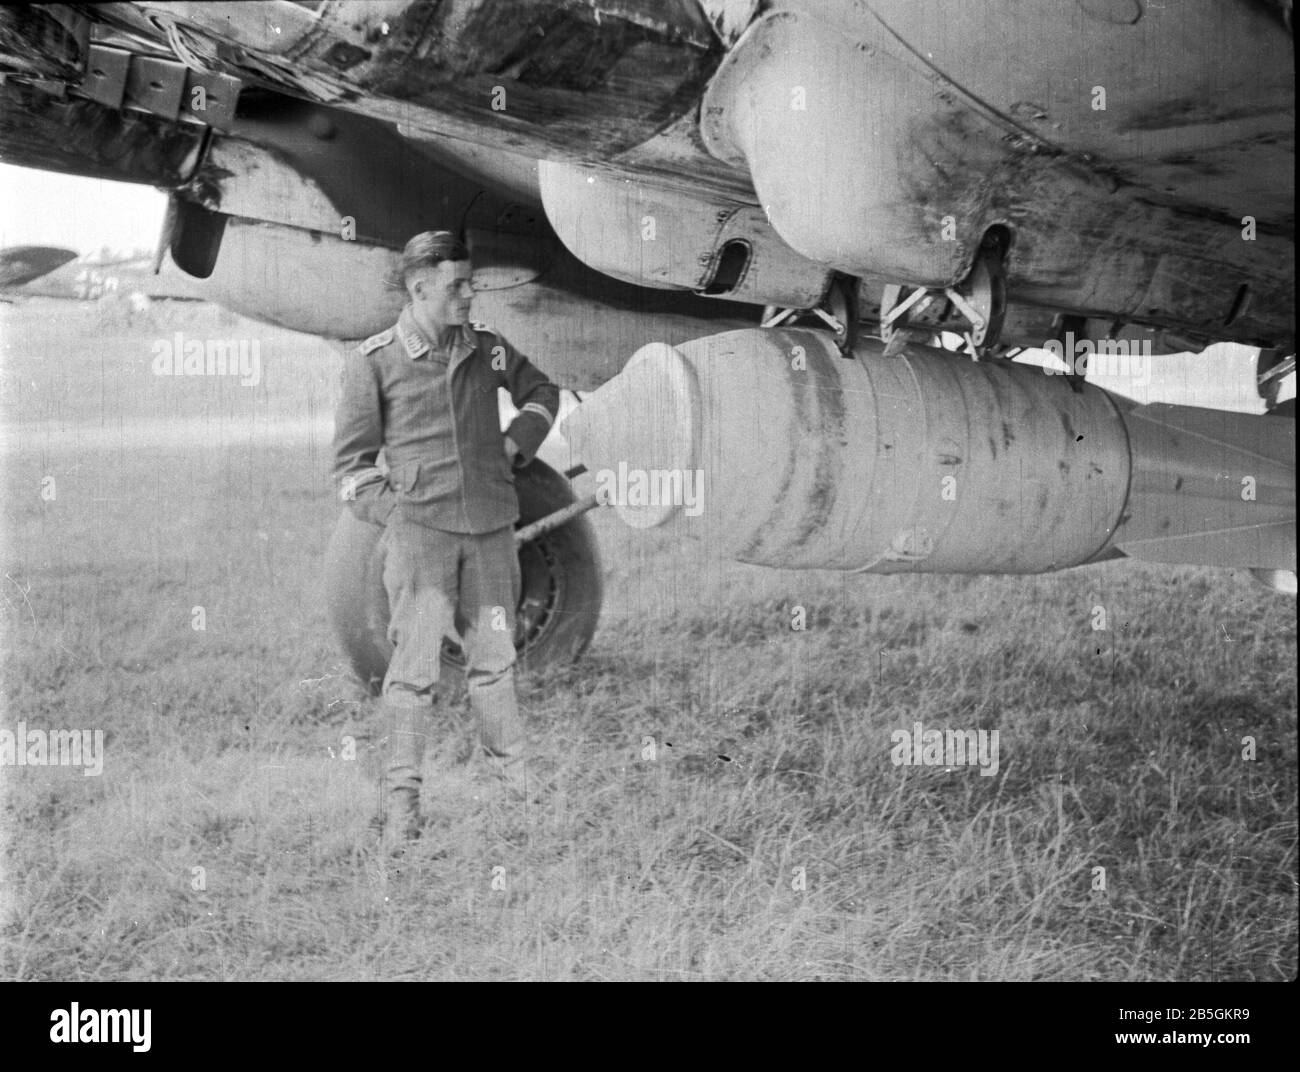 Wehrmacht Luftwaffe Fliegerbombe / Sprengbombe SD 1.700 kg / Aerial Bomb / Thick Walled Explosive Bomb  3.750 lb Stock Photo